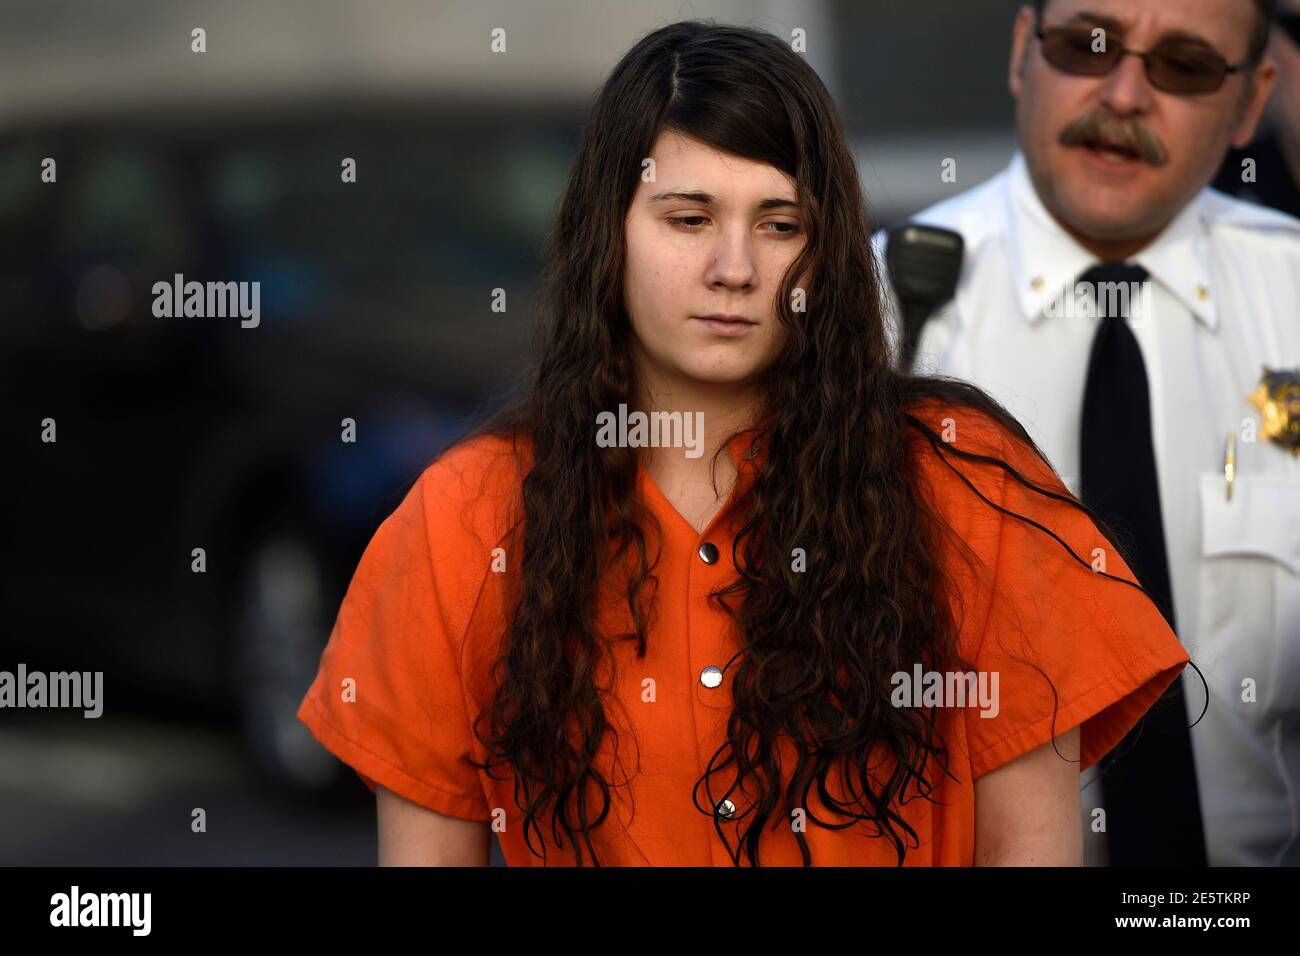 Miranda Barbour, 19, the woman dubbed the so-called Craigslist killer  suspect, is led into court by sheriff deputies in Sunbury, Pennsylvania  April 1, 2014. Barbour and her husband, Elytte Barbour, 22, have